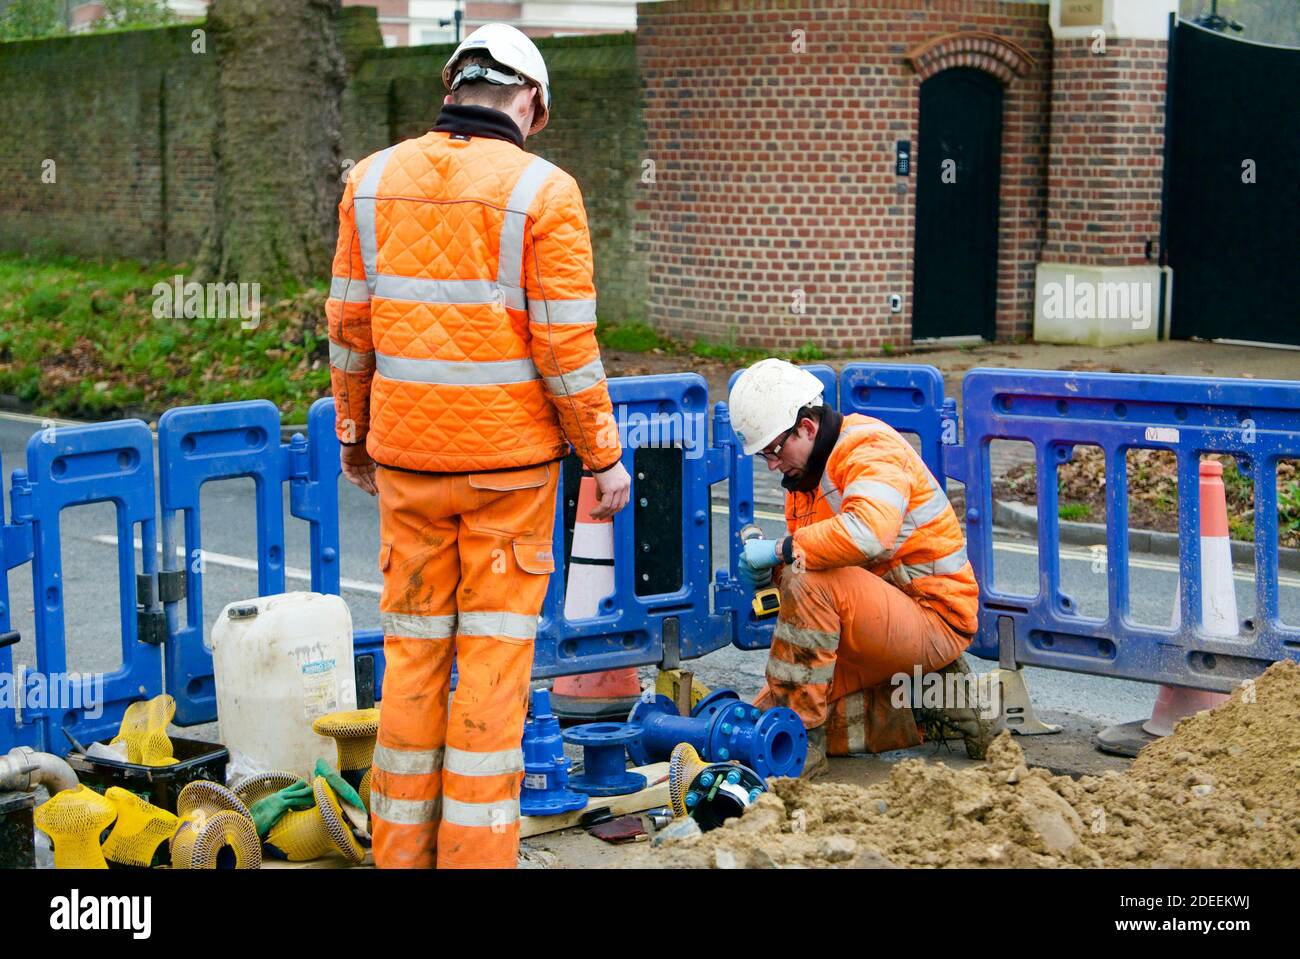 Two men wearing high visibility clothing carrying out road works for water and gas. One man kneeling one man supervising standing. Using power tools. Stock Photo